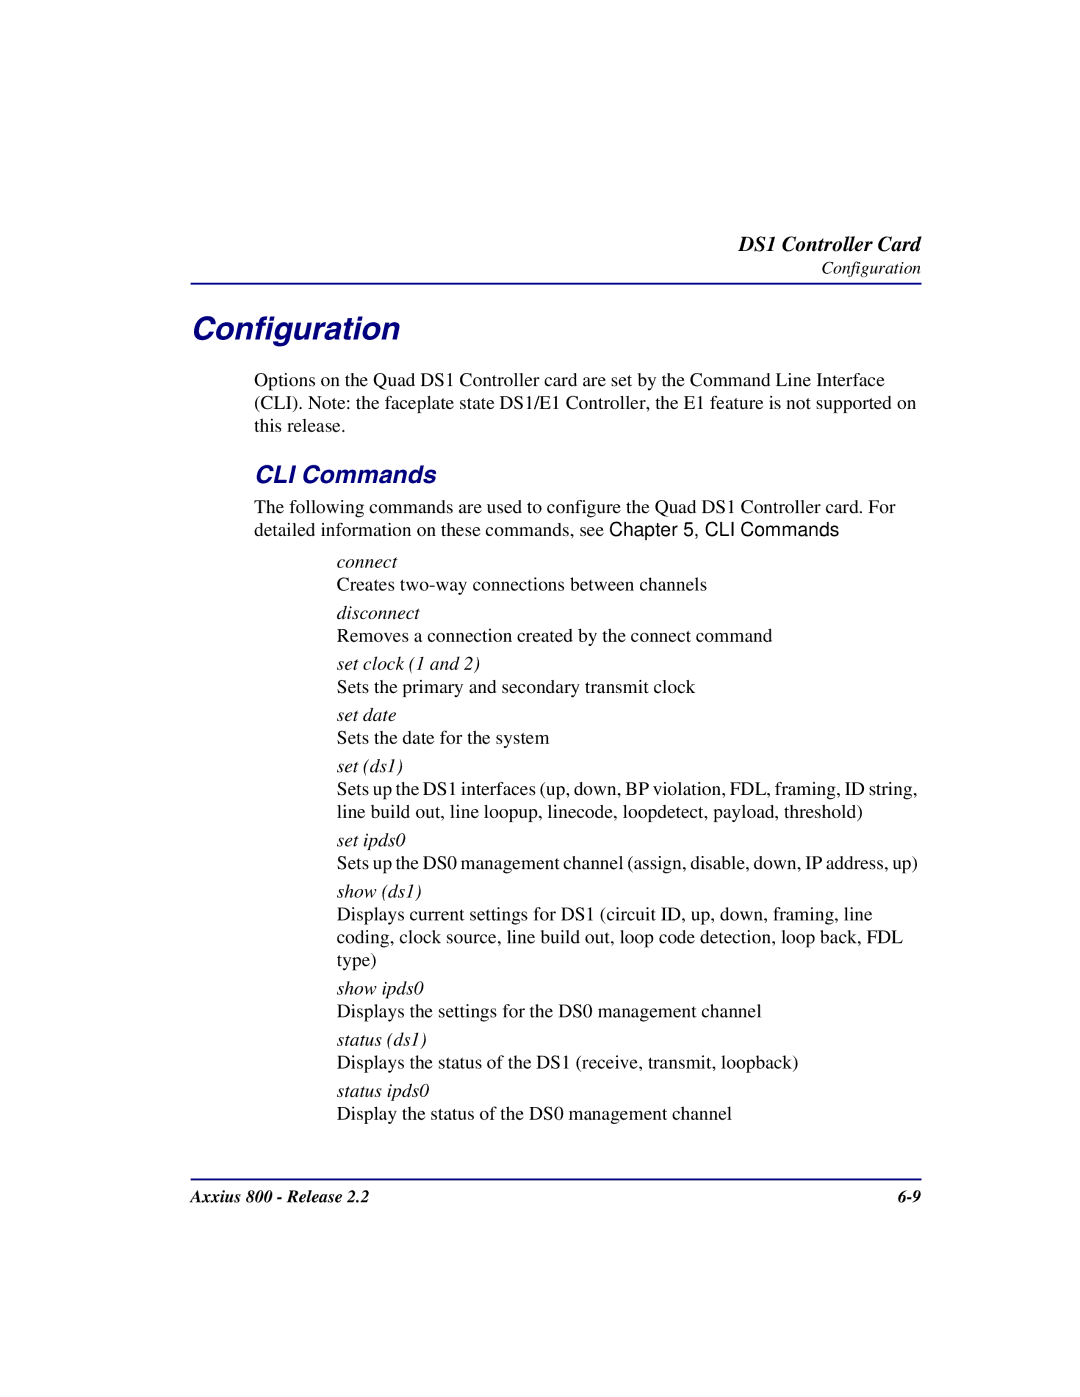 Carrier Access Axxius 800 user manual Configuration, Set ds1 